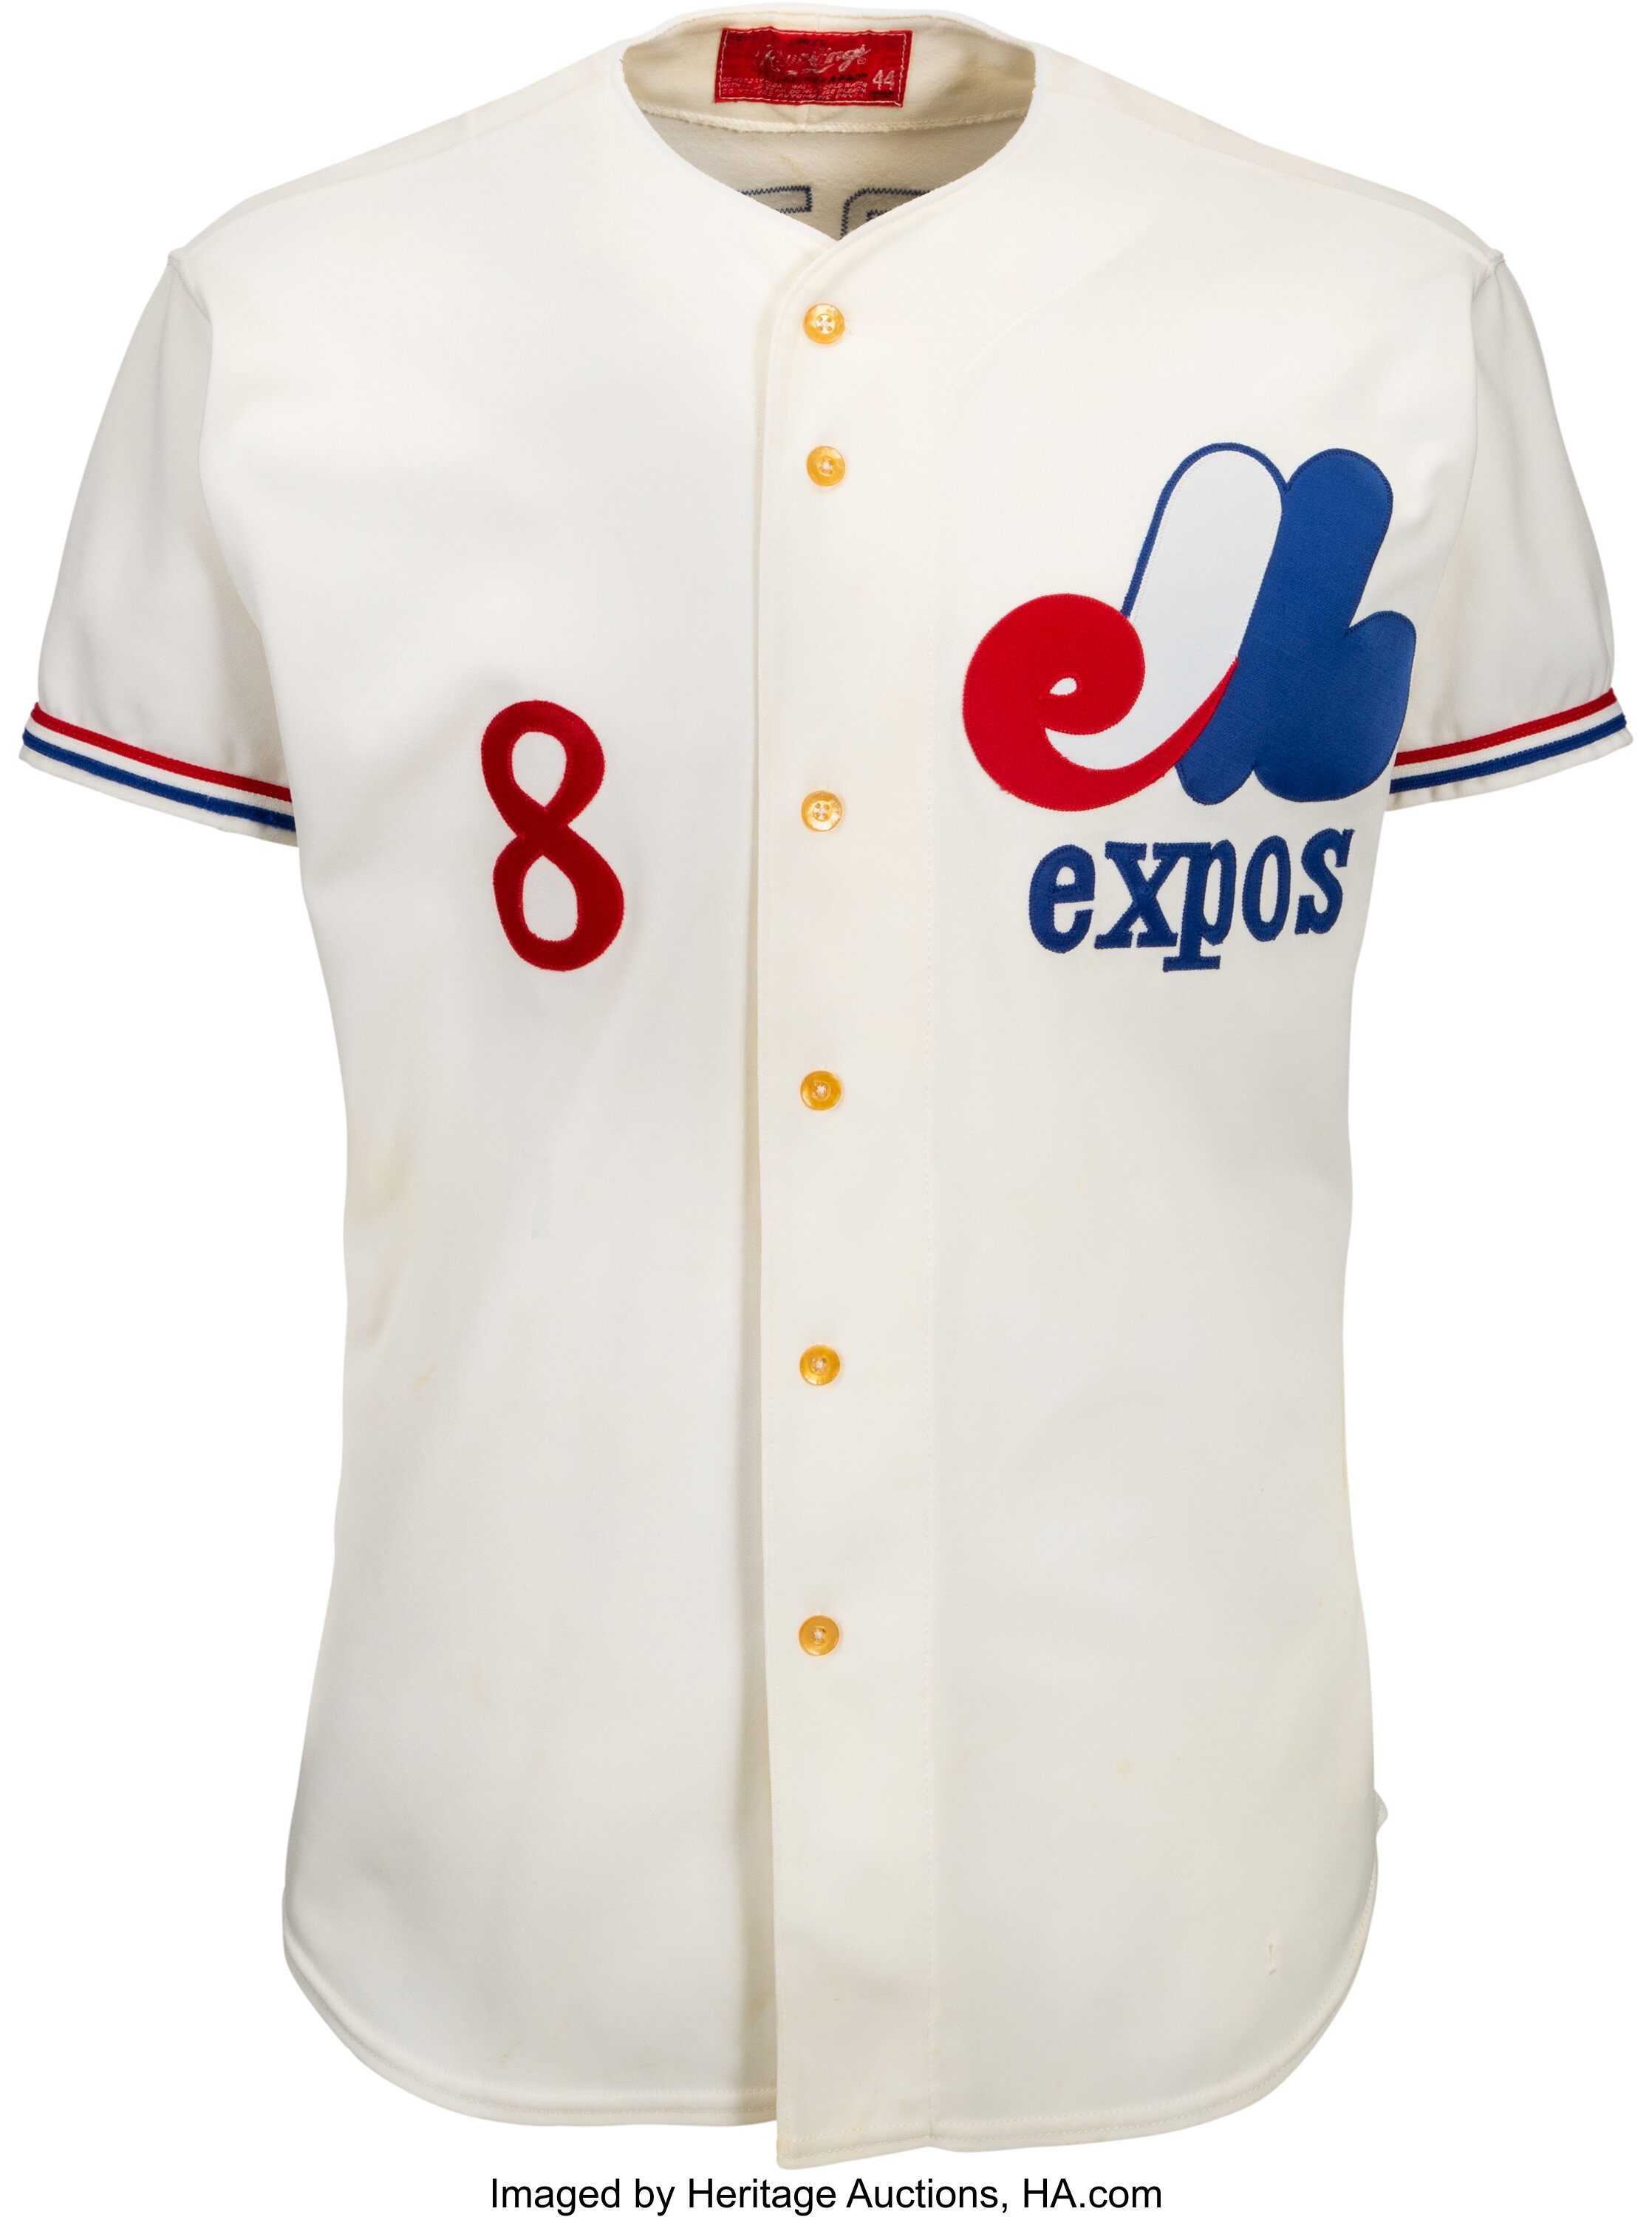 Gary Carter Montreal Expos 1981 Cooperstown Away Baseball Throwback Jersey, Baseball Stitched Jersey, Vintage Unifrom Jersey